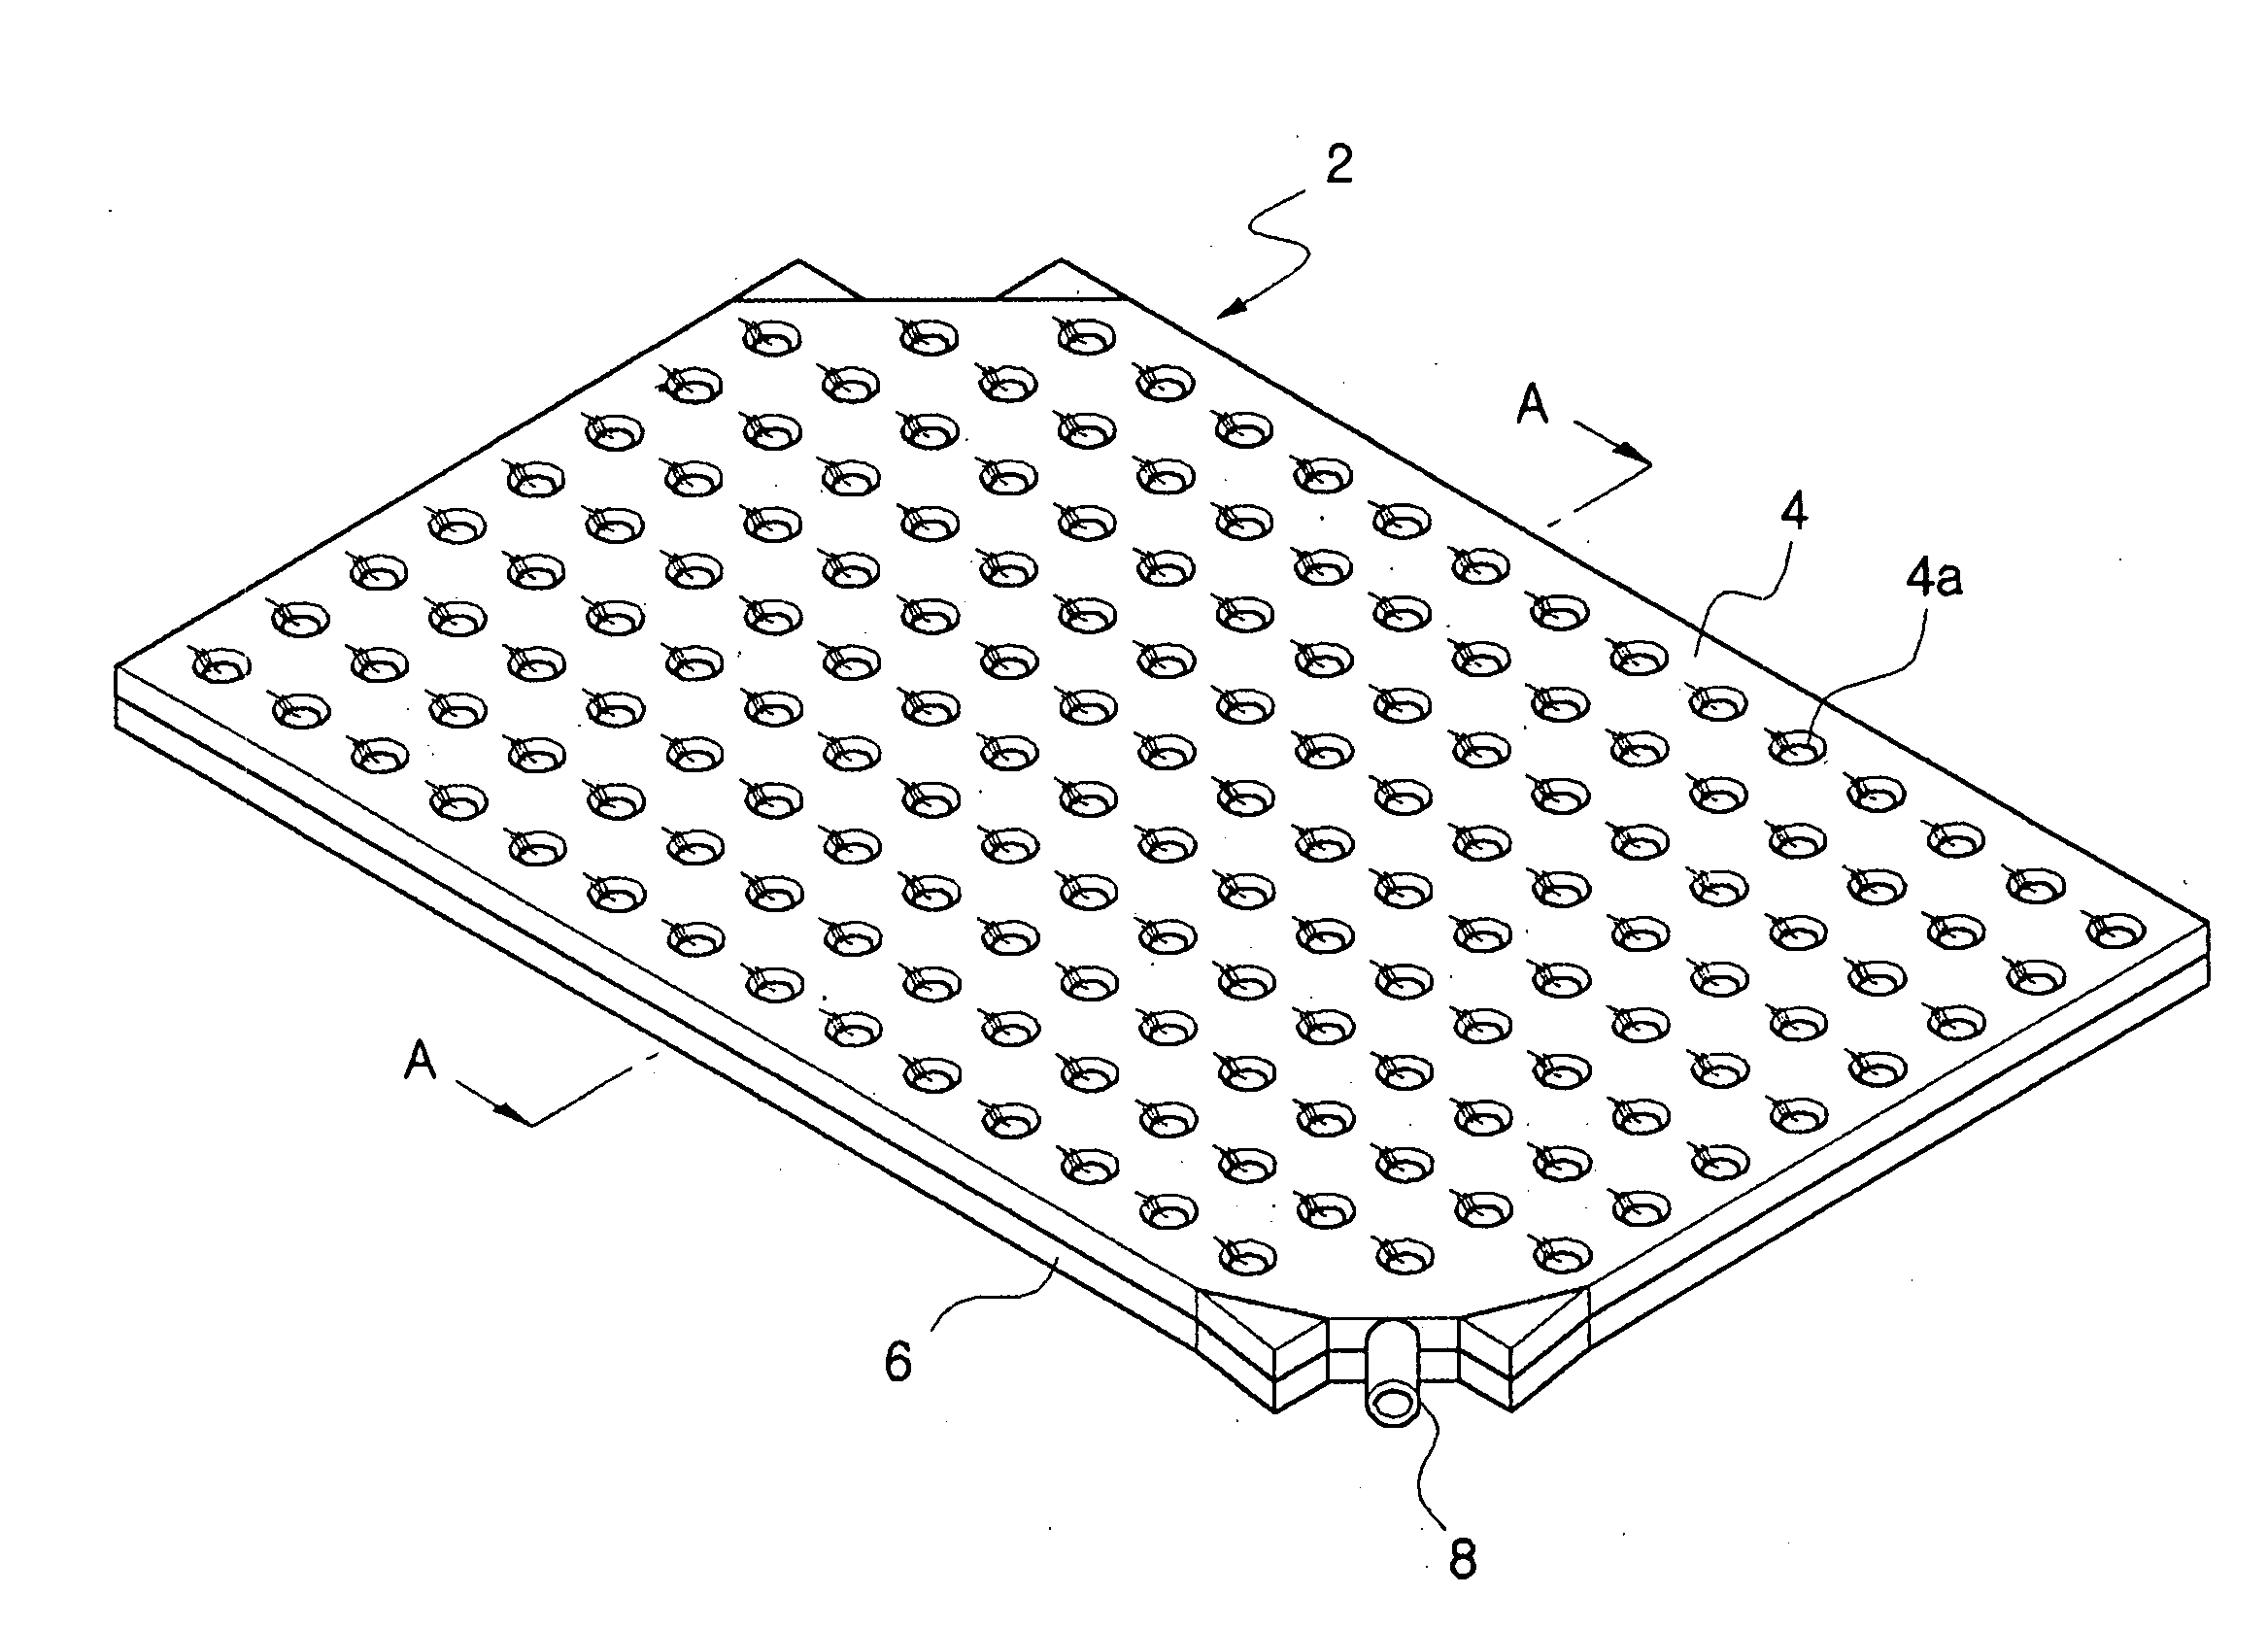 Plate-shaped heating panel in which connecting members are fastened by bolts and nuts